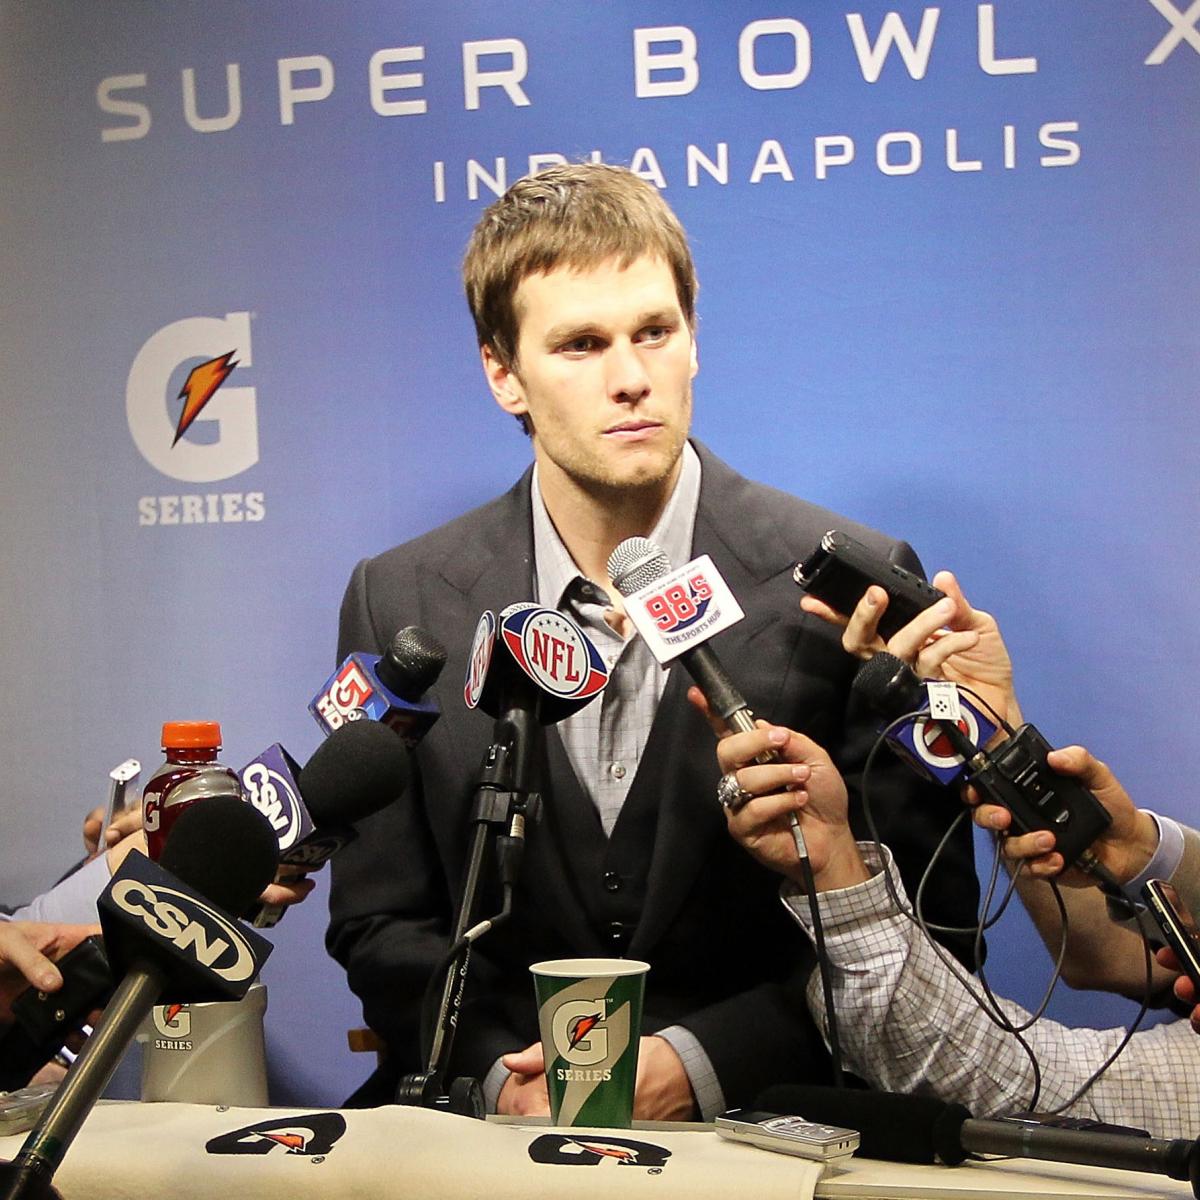 Tom Brady: Why New England Patriots QB Is Still One of the Greatest | Bleacher Report ...